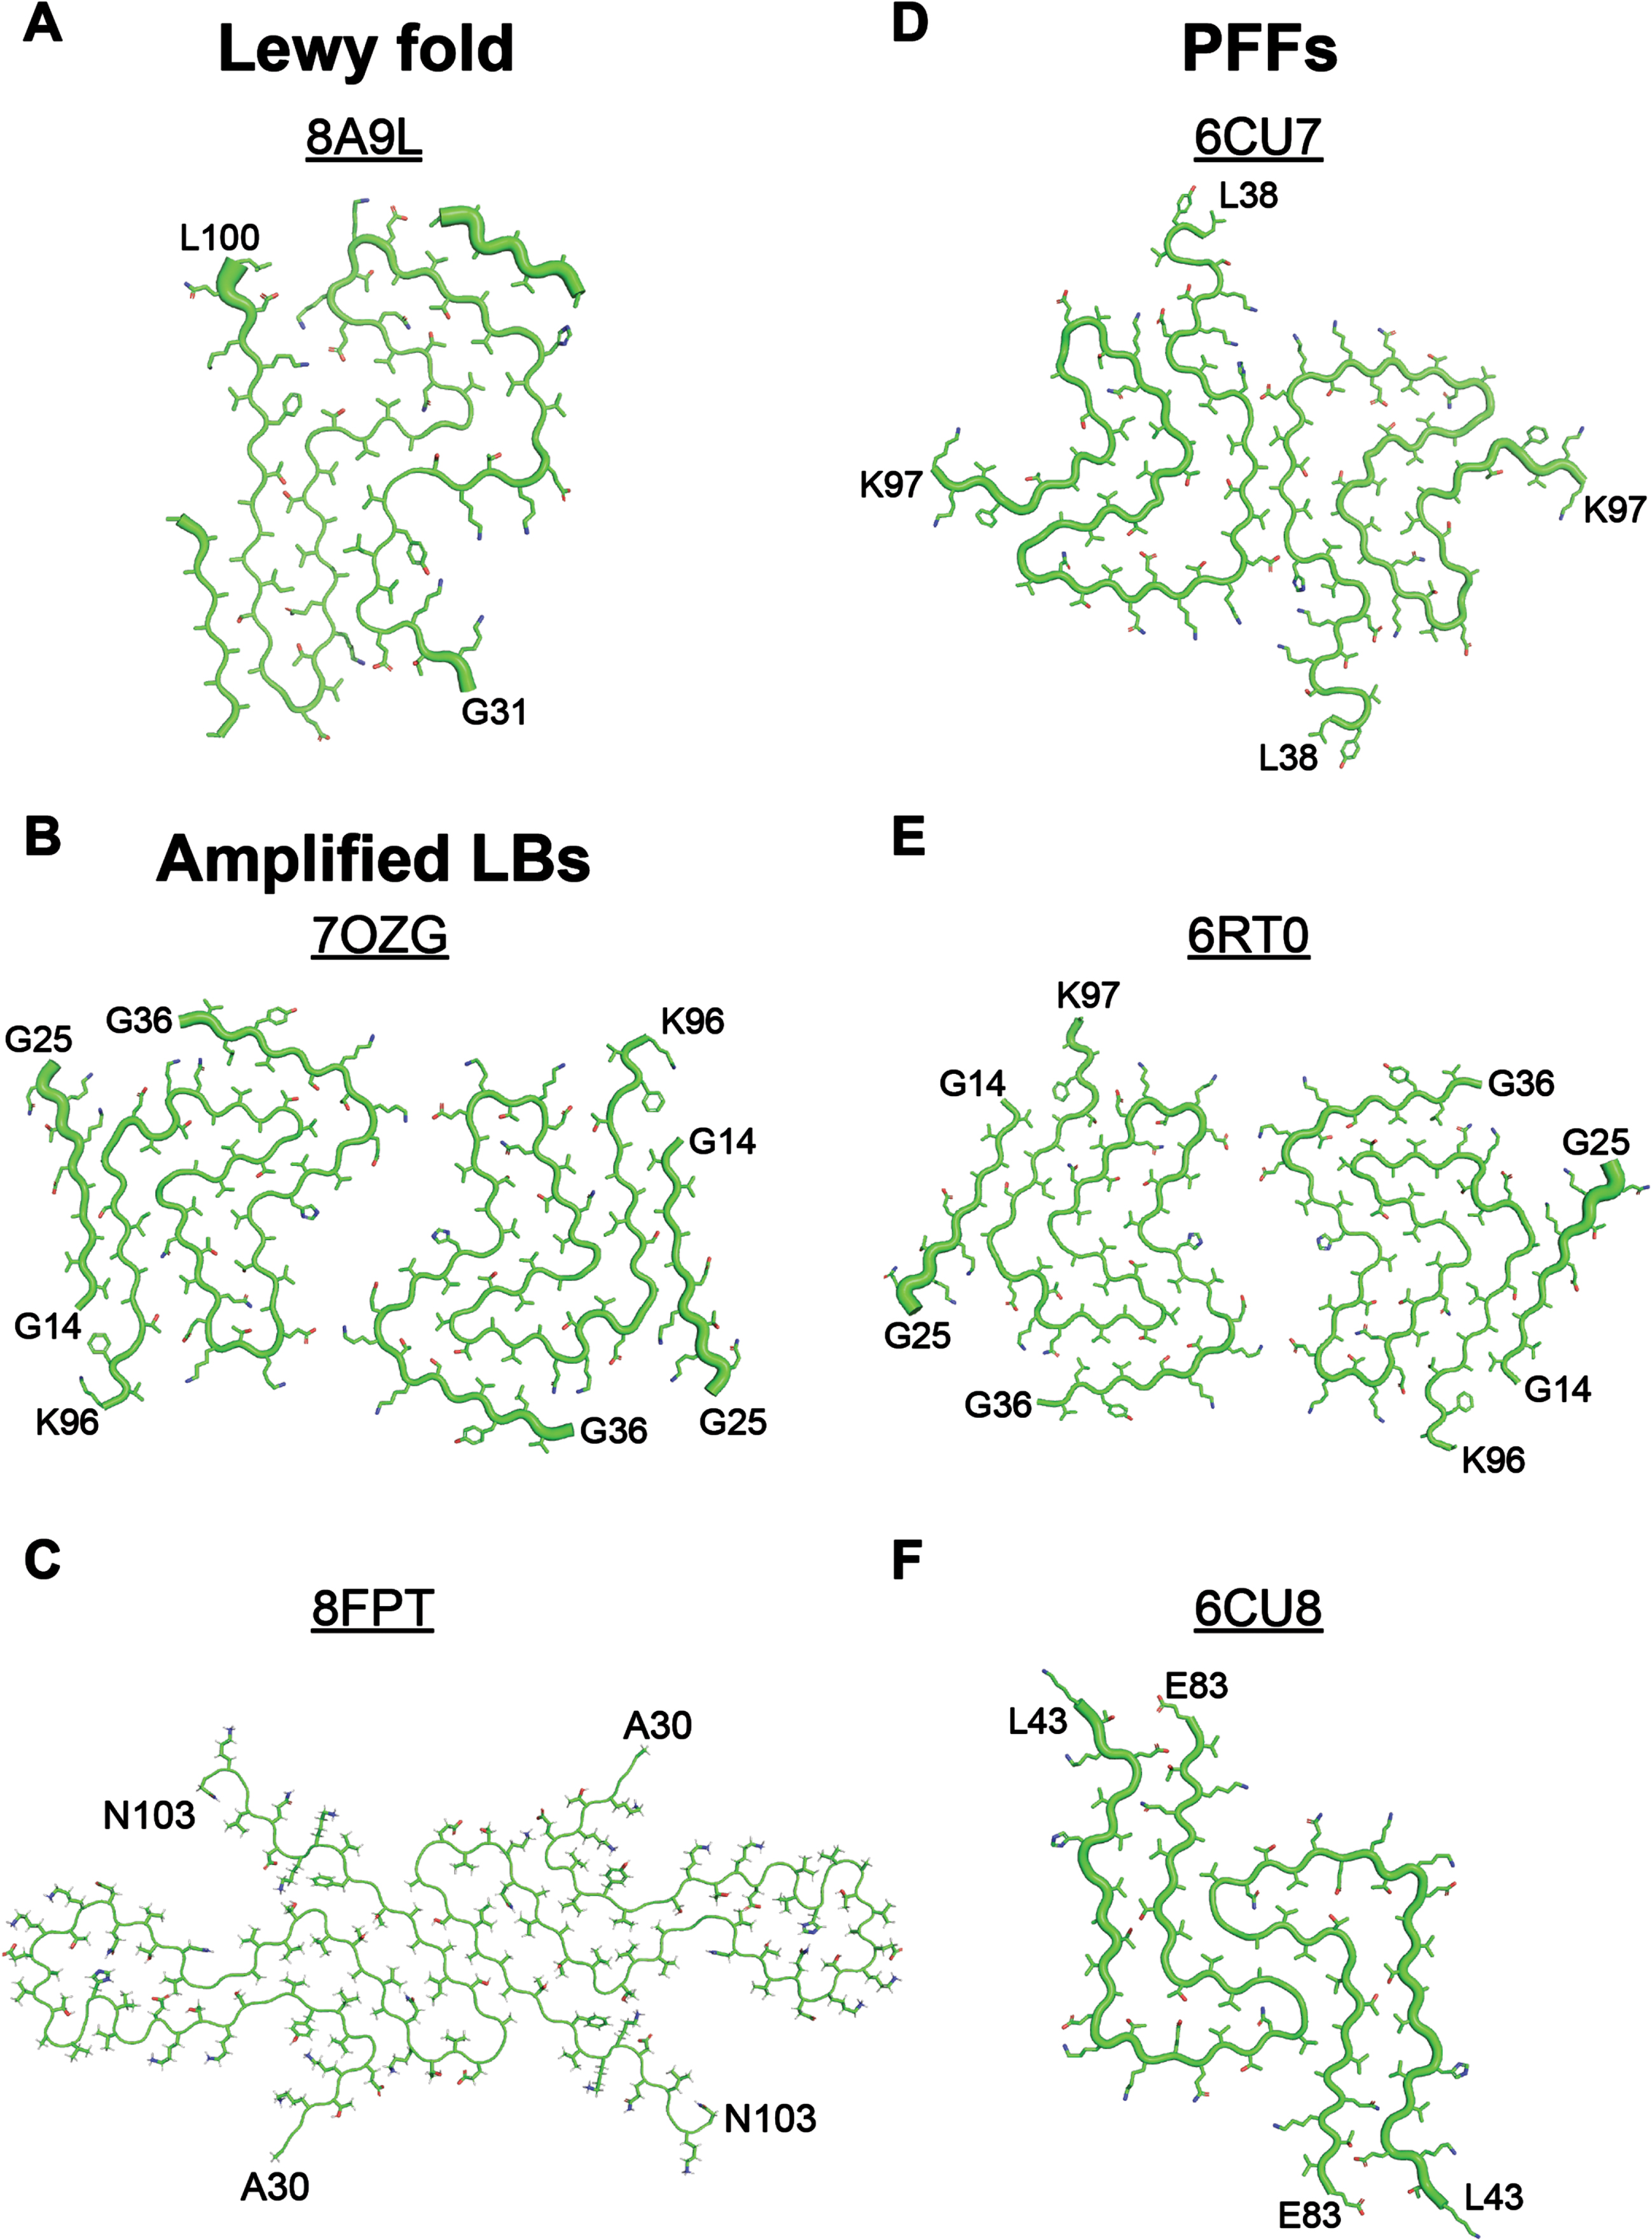 
PFFs do not adopt the same α-synuclein conformation that is present in Lewy bodies. A) The cryo-EM structure of α-synuclein fibrils isolated from patients with Lewy body (LB) diseases (PDB ID: 8A9L, published in8) differs substantially from the cryo-EM structures of fibrils generated either (B, C) by seeding monomeric α-synuclein with LB diseases or (D-F) by spontaneous fibrilization of monomeric protein. B, C) Using RT-QuIC methods to amplify α-synuclein in LB disease patients has not resulted in faithful replication of the Lewy fold seen in (A). B) PDB ID: 7OZG published in.16 C) PDB ID: 8FPT published in 15. D-F) Spontaneous fibrilization of monomeric α-synuclein does not recapitulate the Lewy fold, though some PFF structures show similarity to the amplified LB fibrils (compare B and E). D) PDB ID: 6CU7 published in37. E) PDB ID: 6RT0 published in.38 F) PDB ID: 6CU8 published in37.